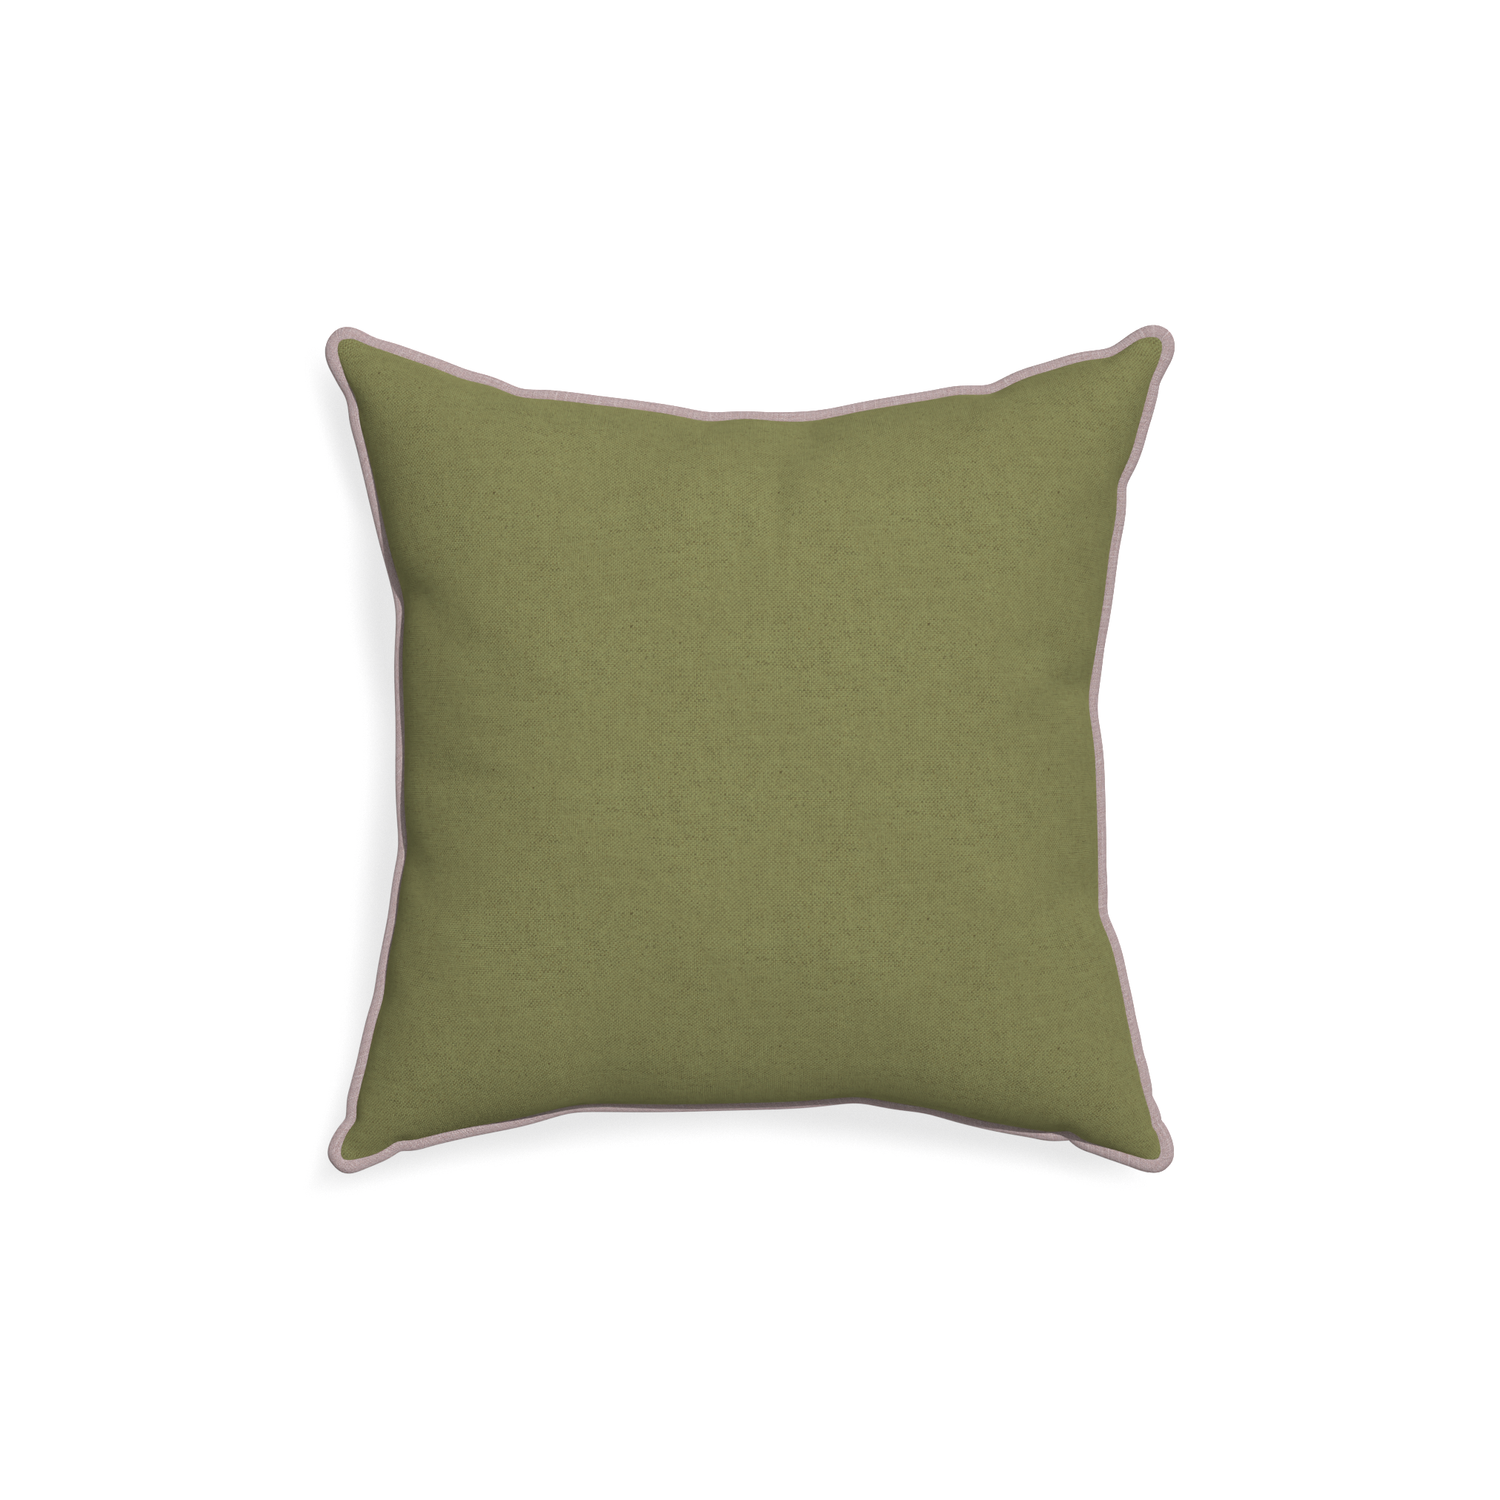 18-square moss custom moss greenpillow with orchid piping on white background